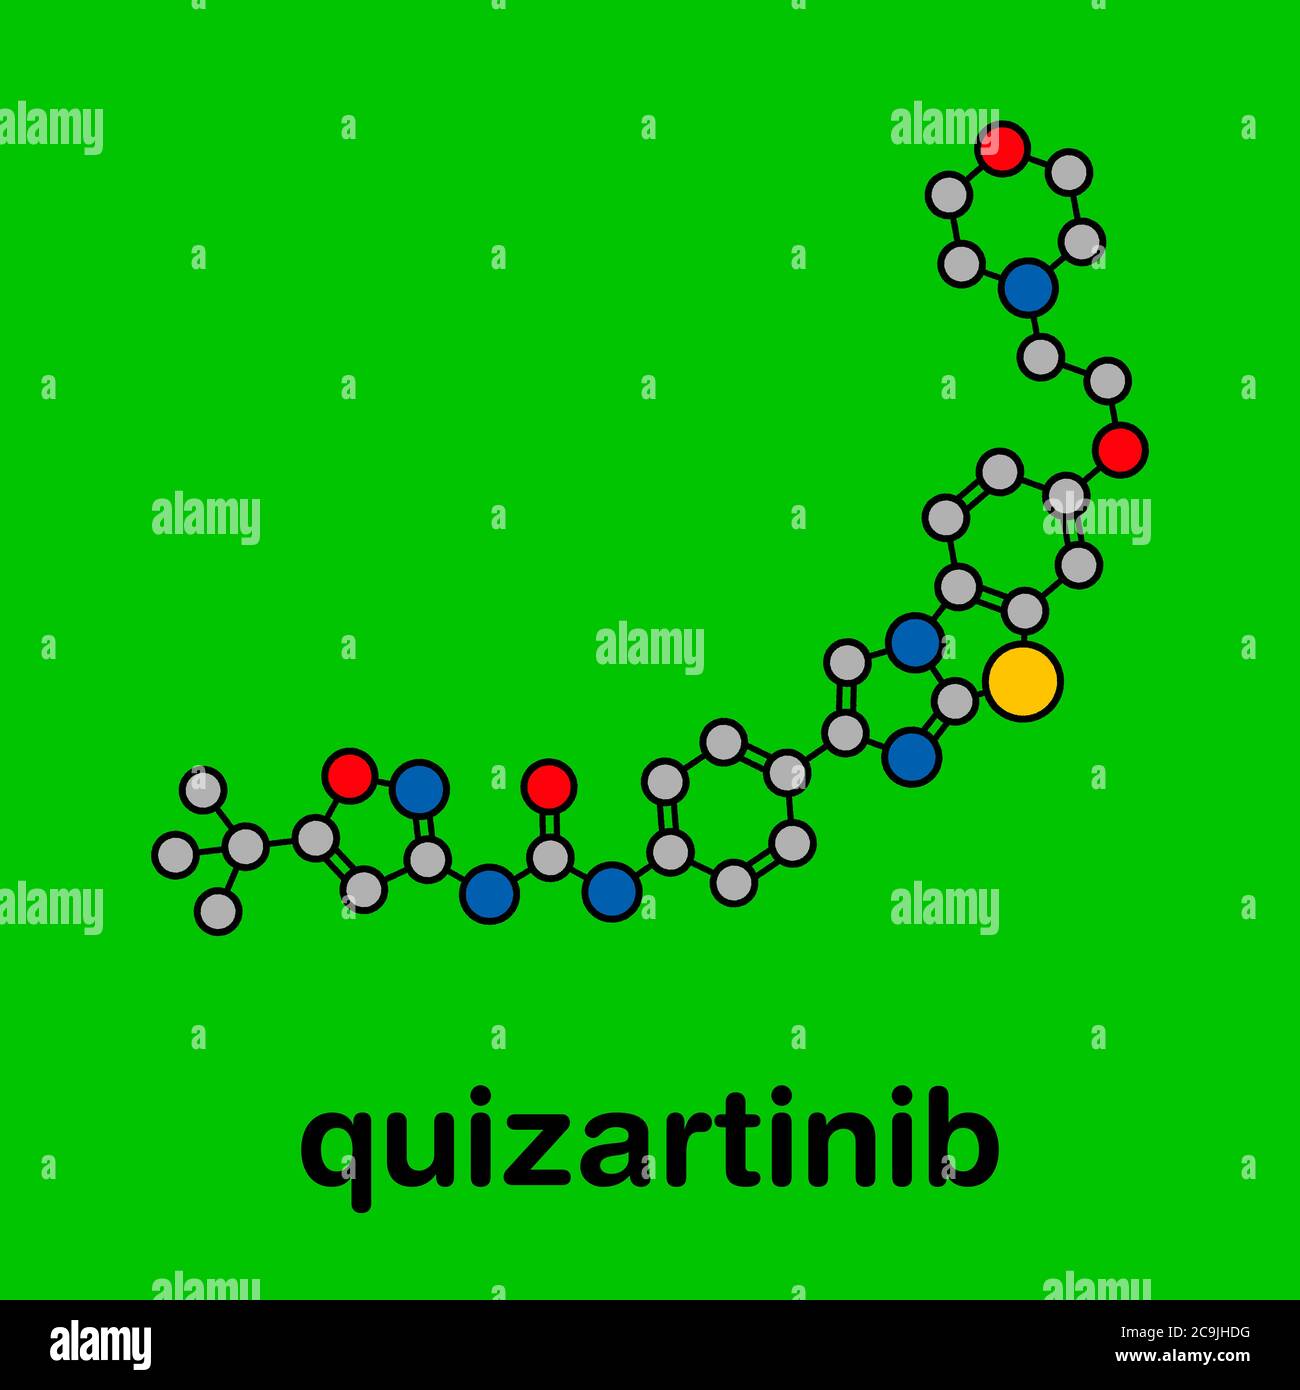 Quizartinib cancer drug molecule (kinase inhibitor). Stylized skeletal formula (chemical structure): Atoms are shown as color-coded circles with thick Stock Photo